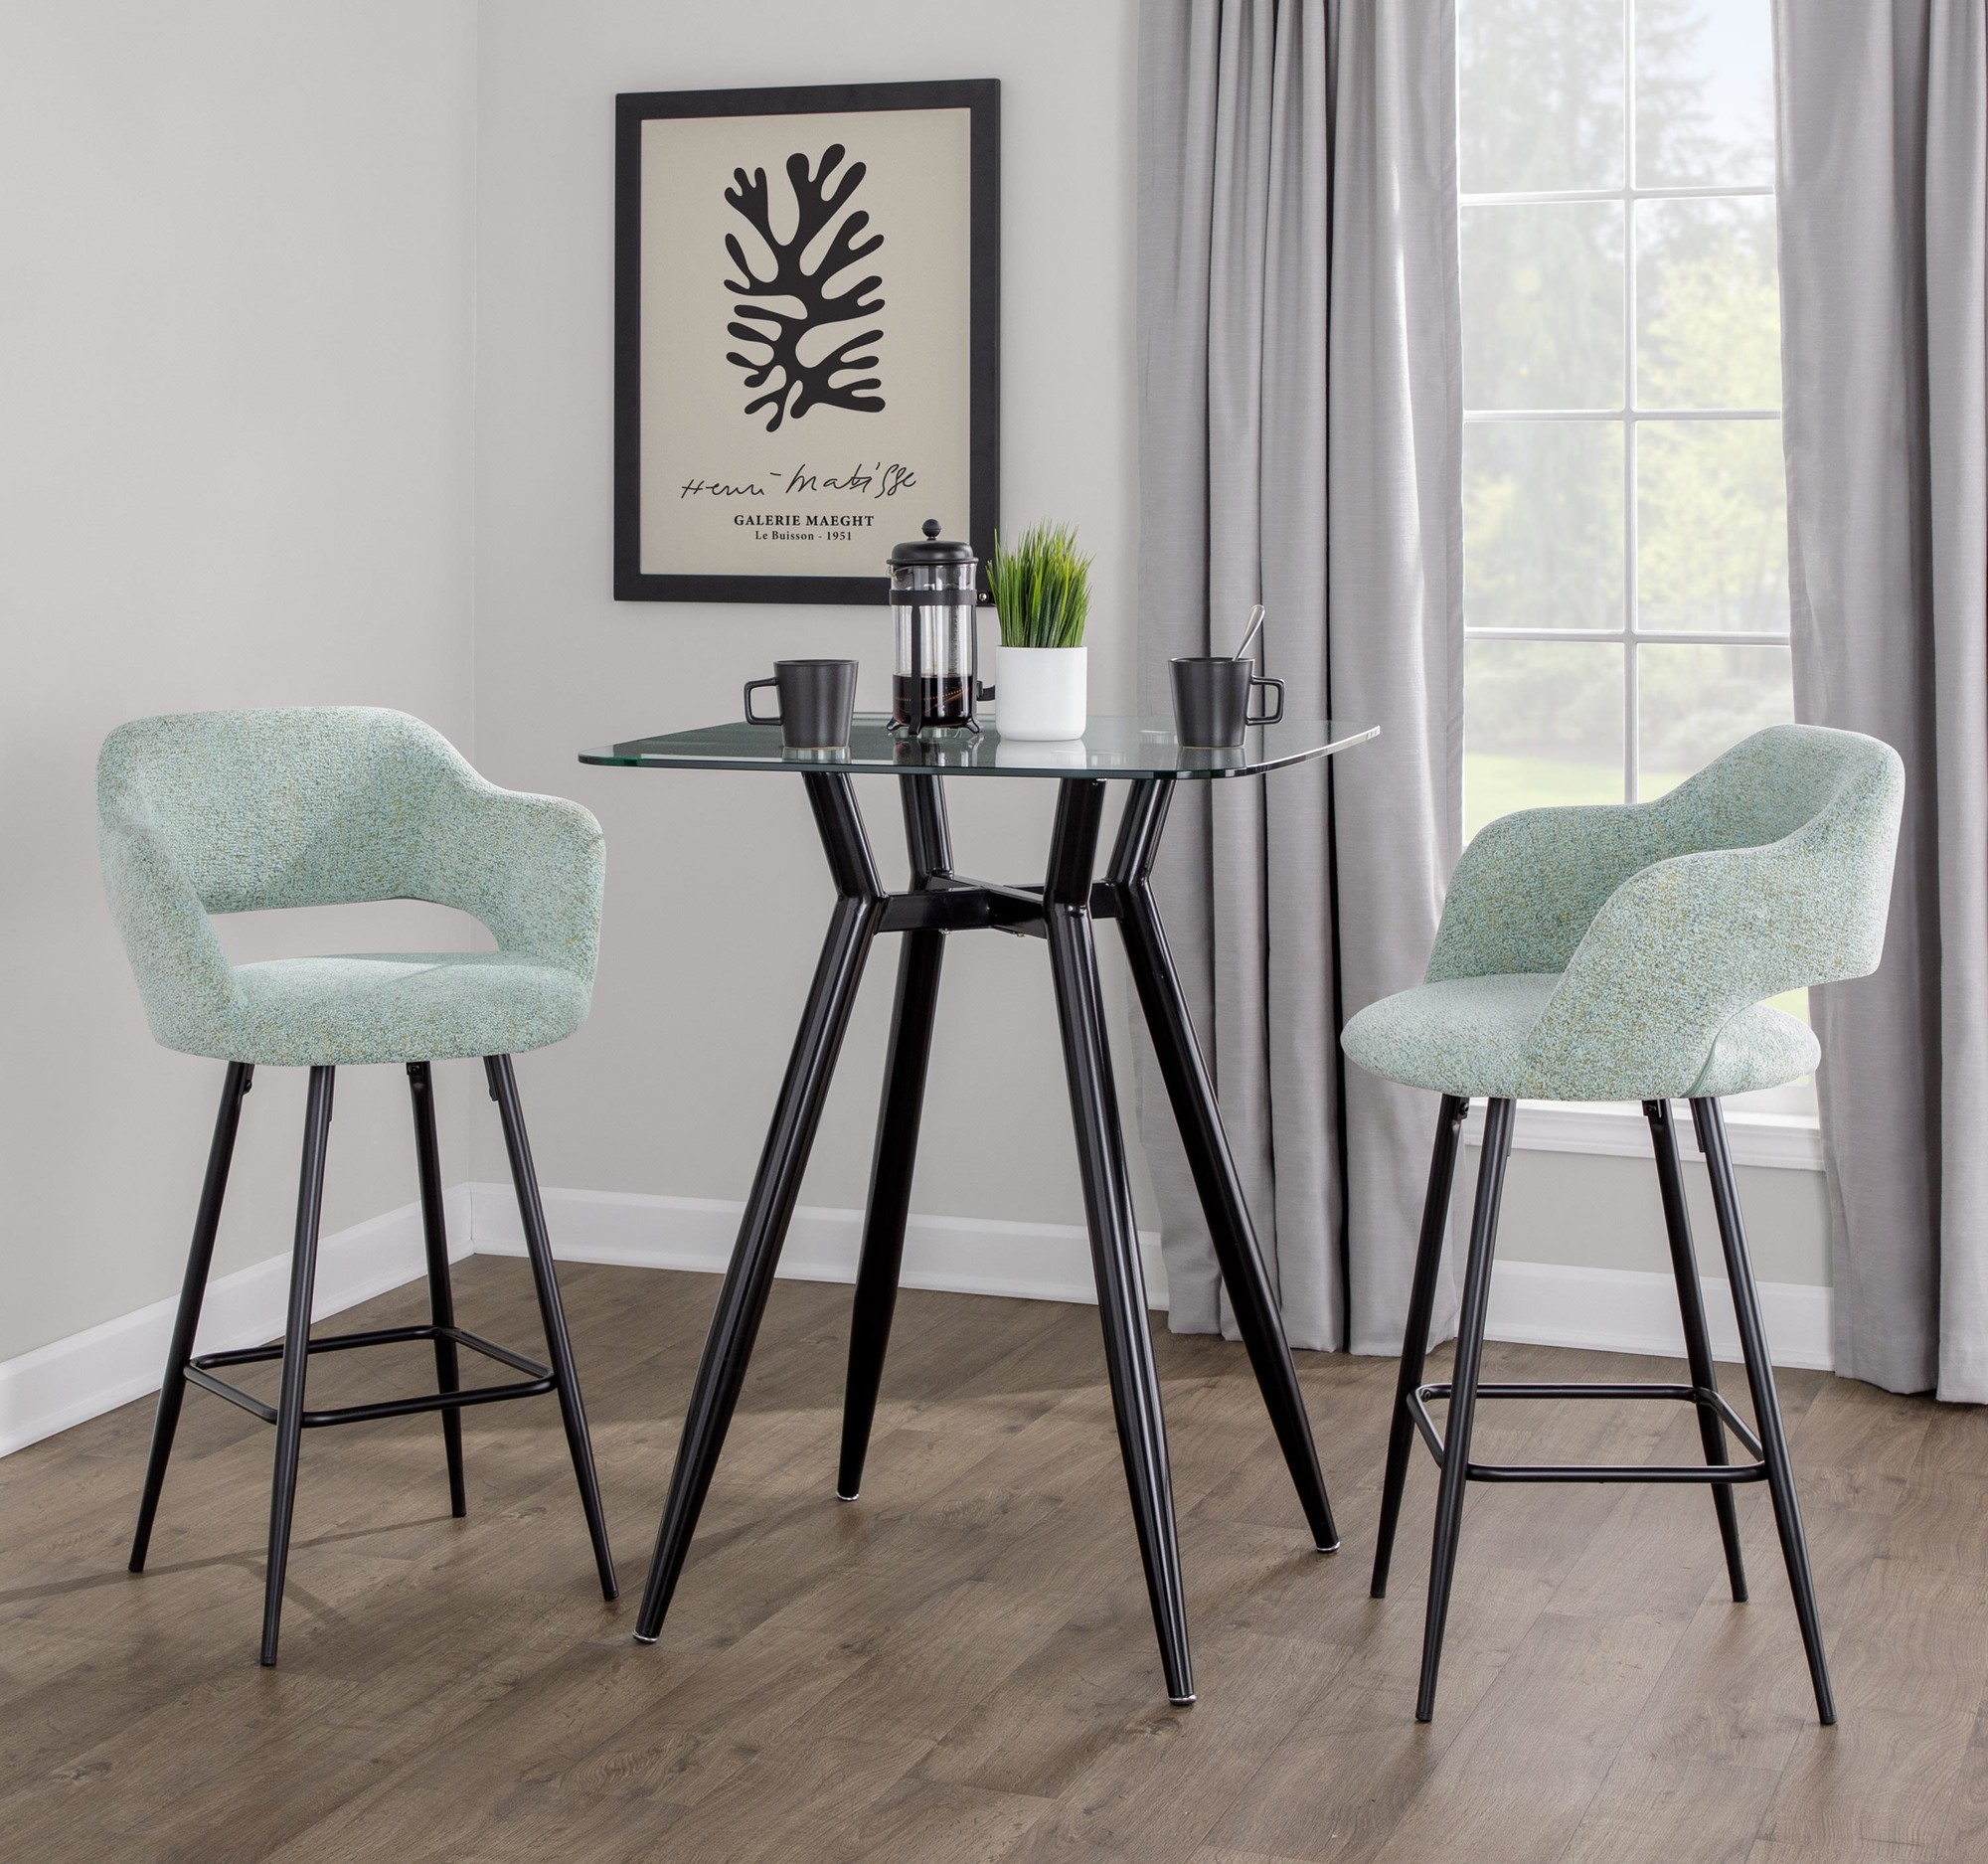 Margarite 27" Fixed-height Counter Stool - Set Of 2